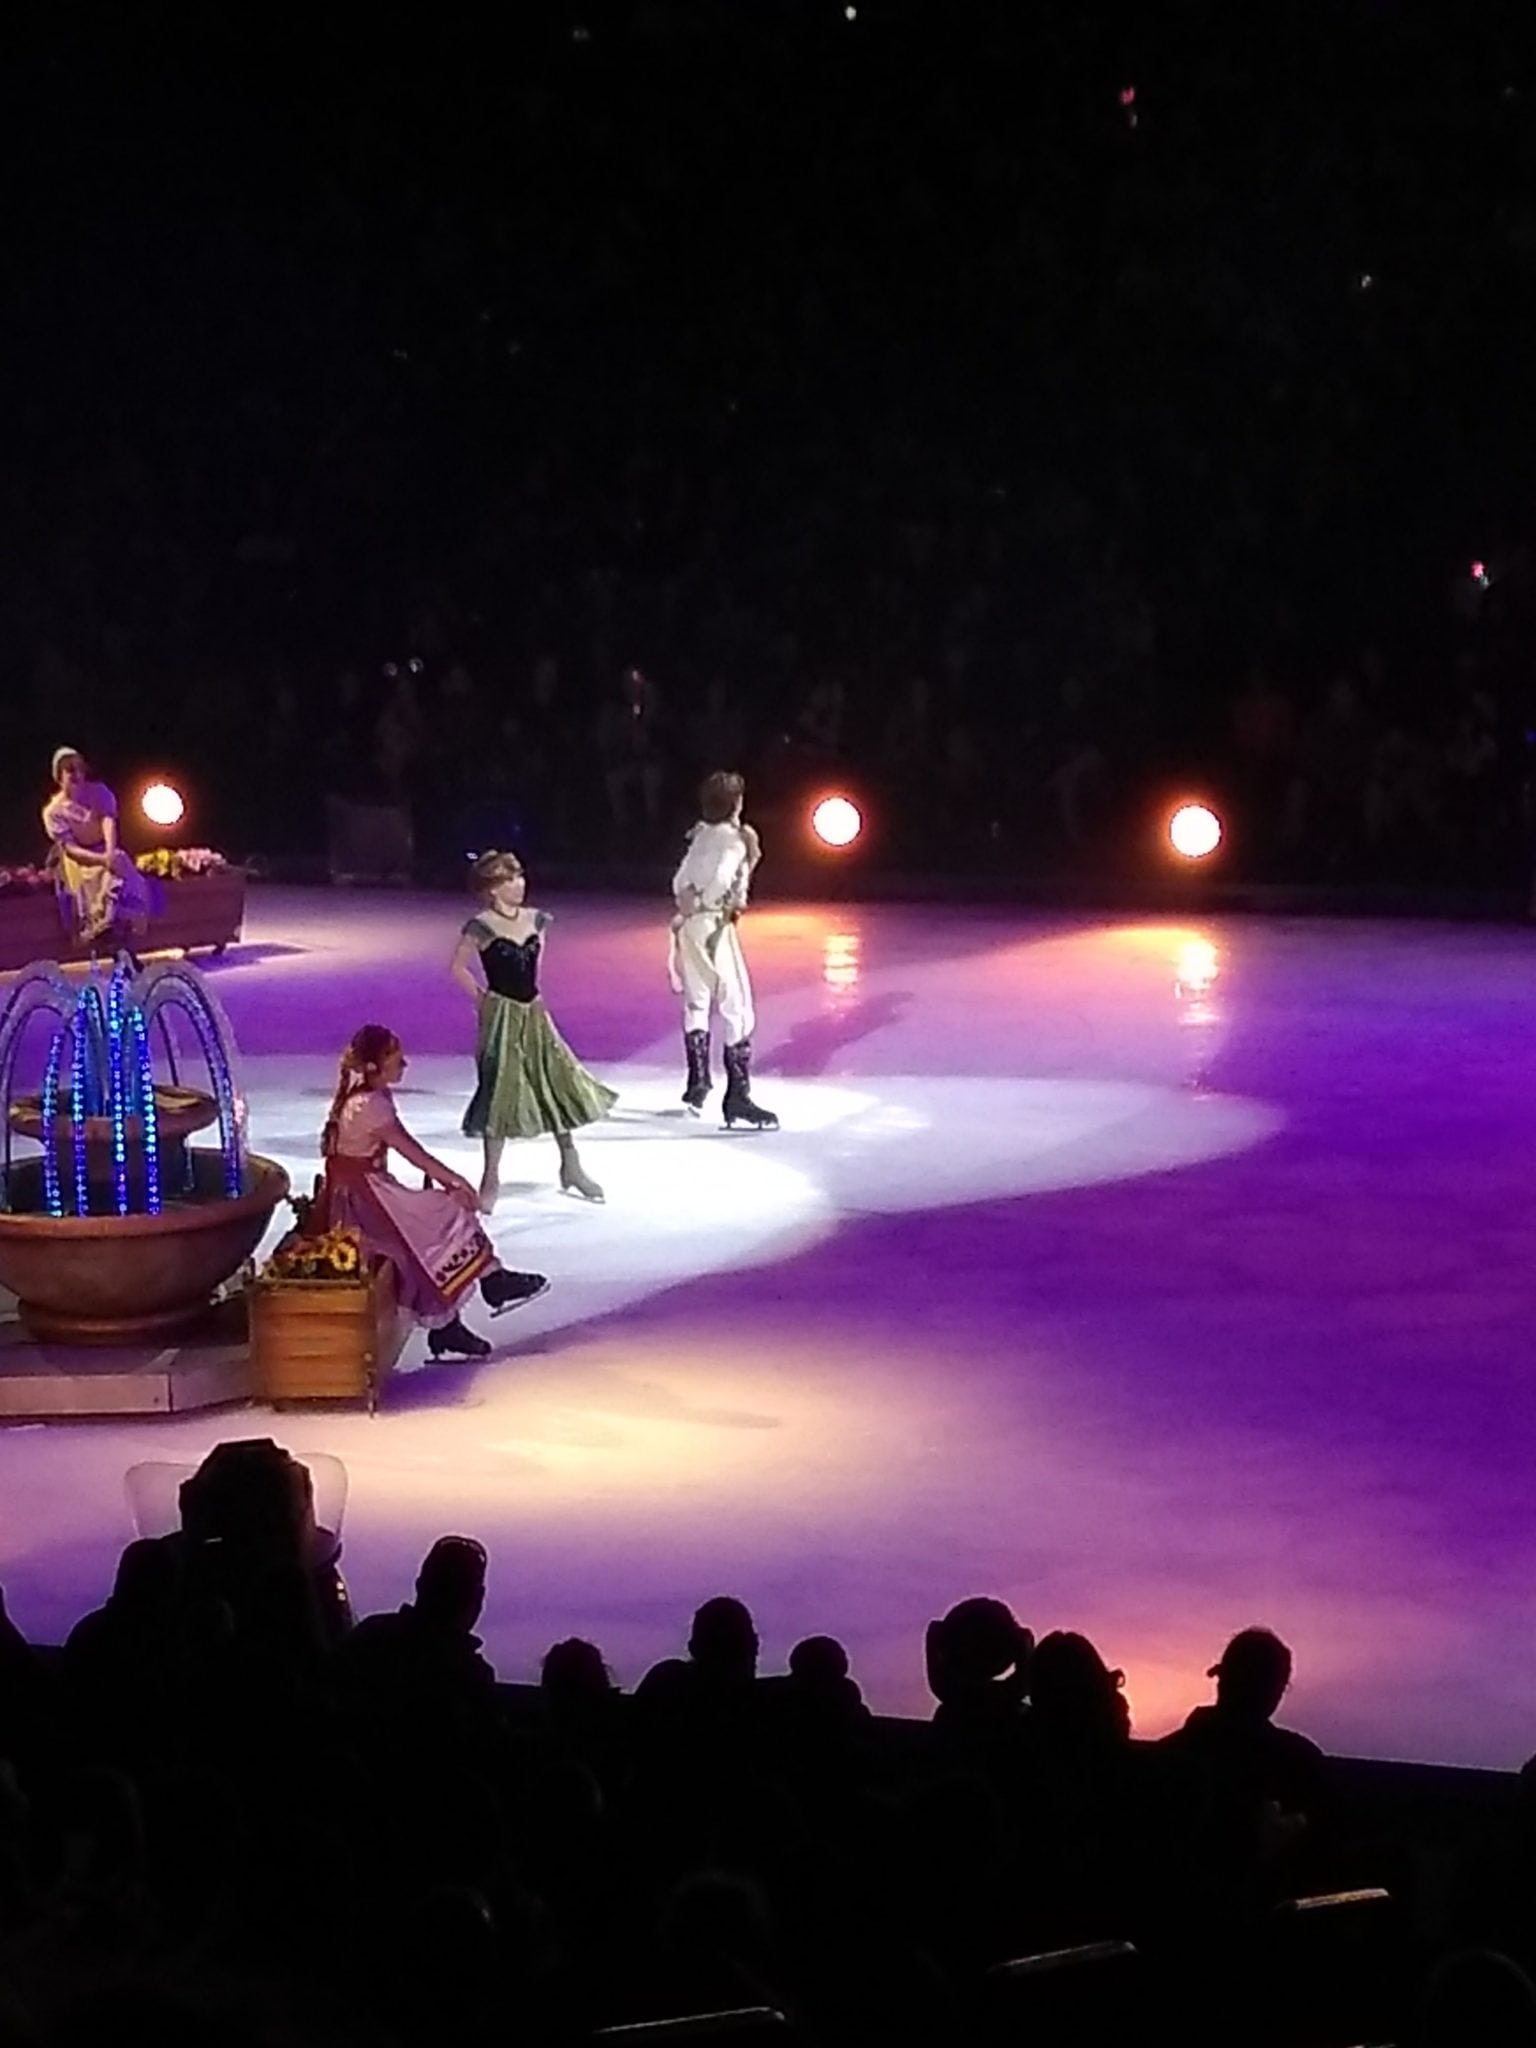 Disney on Ice’s “Reach for the Stars” at the BB&T Center was an Adventure to Remember